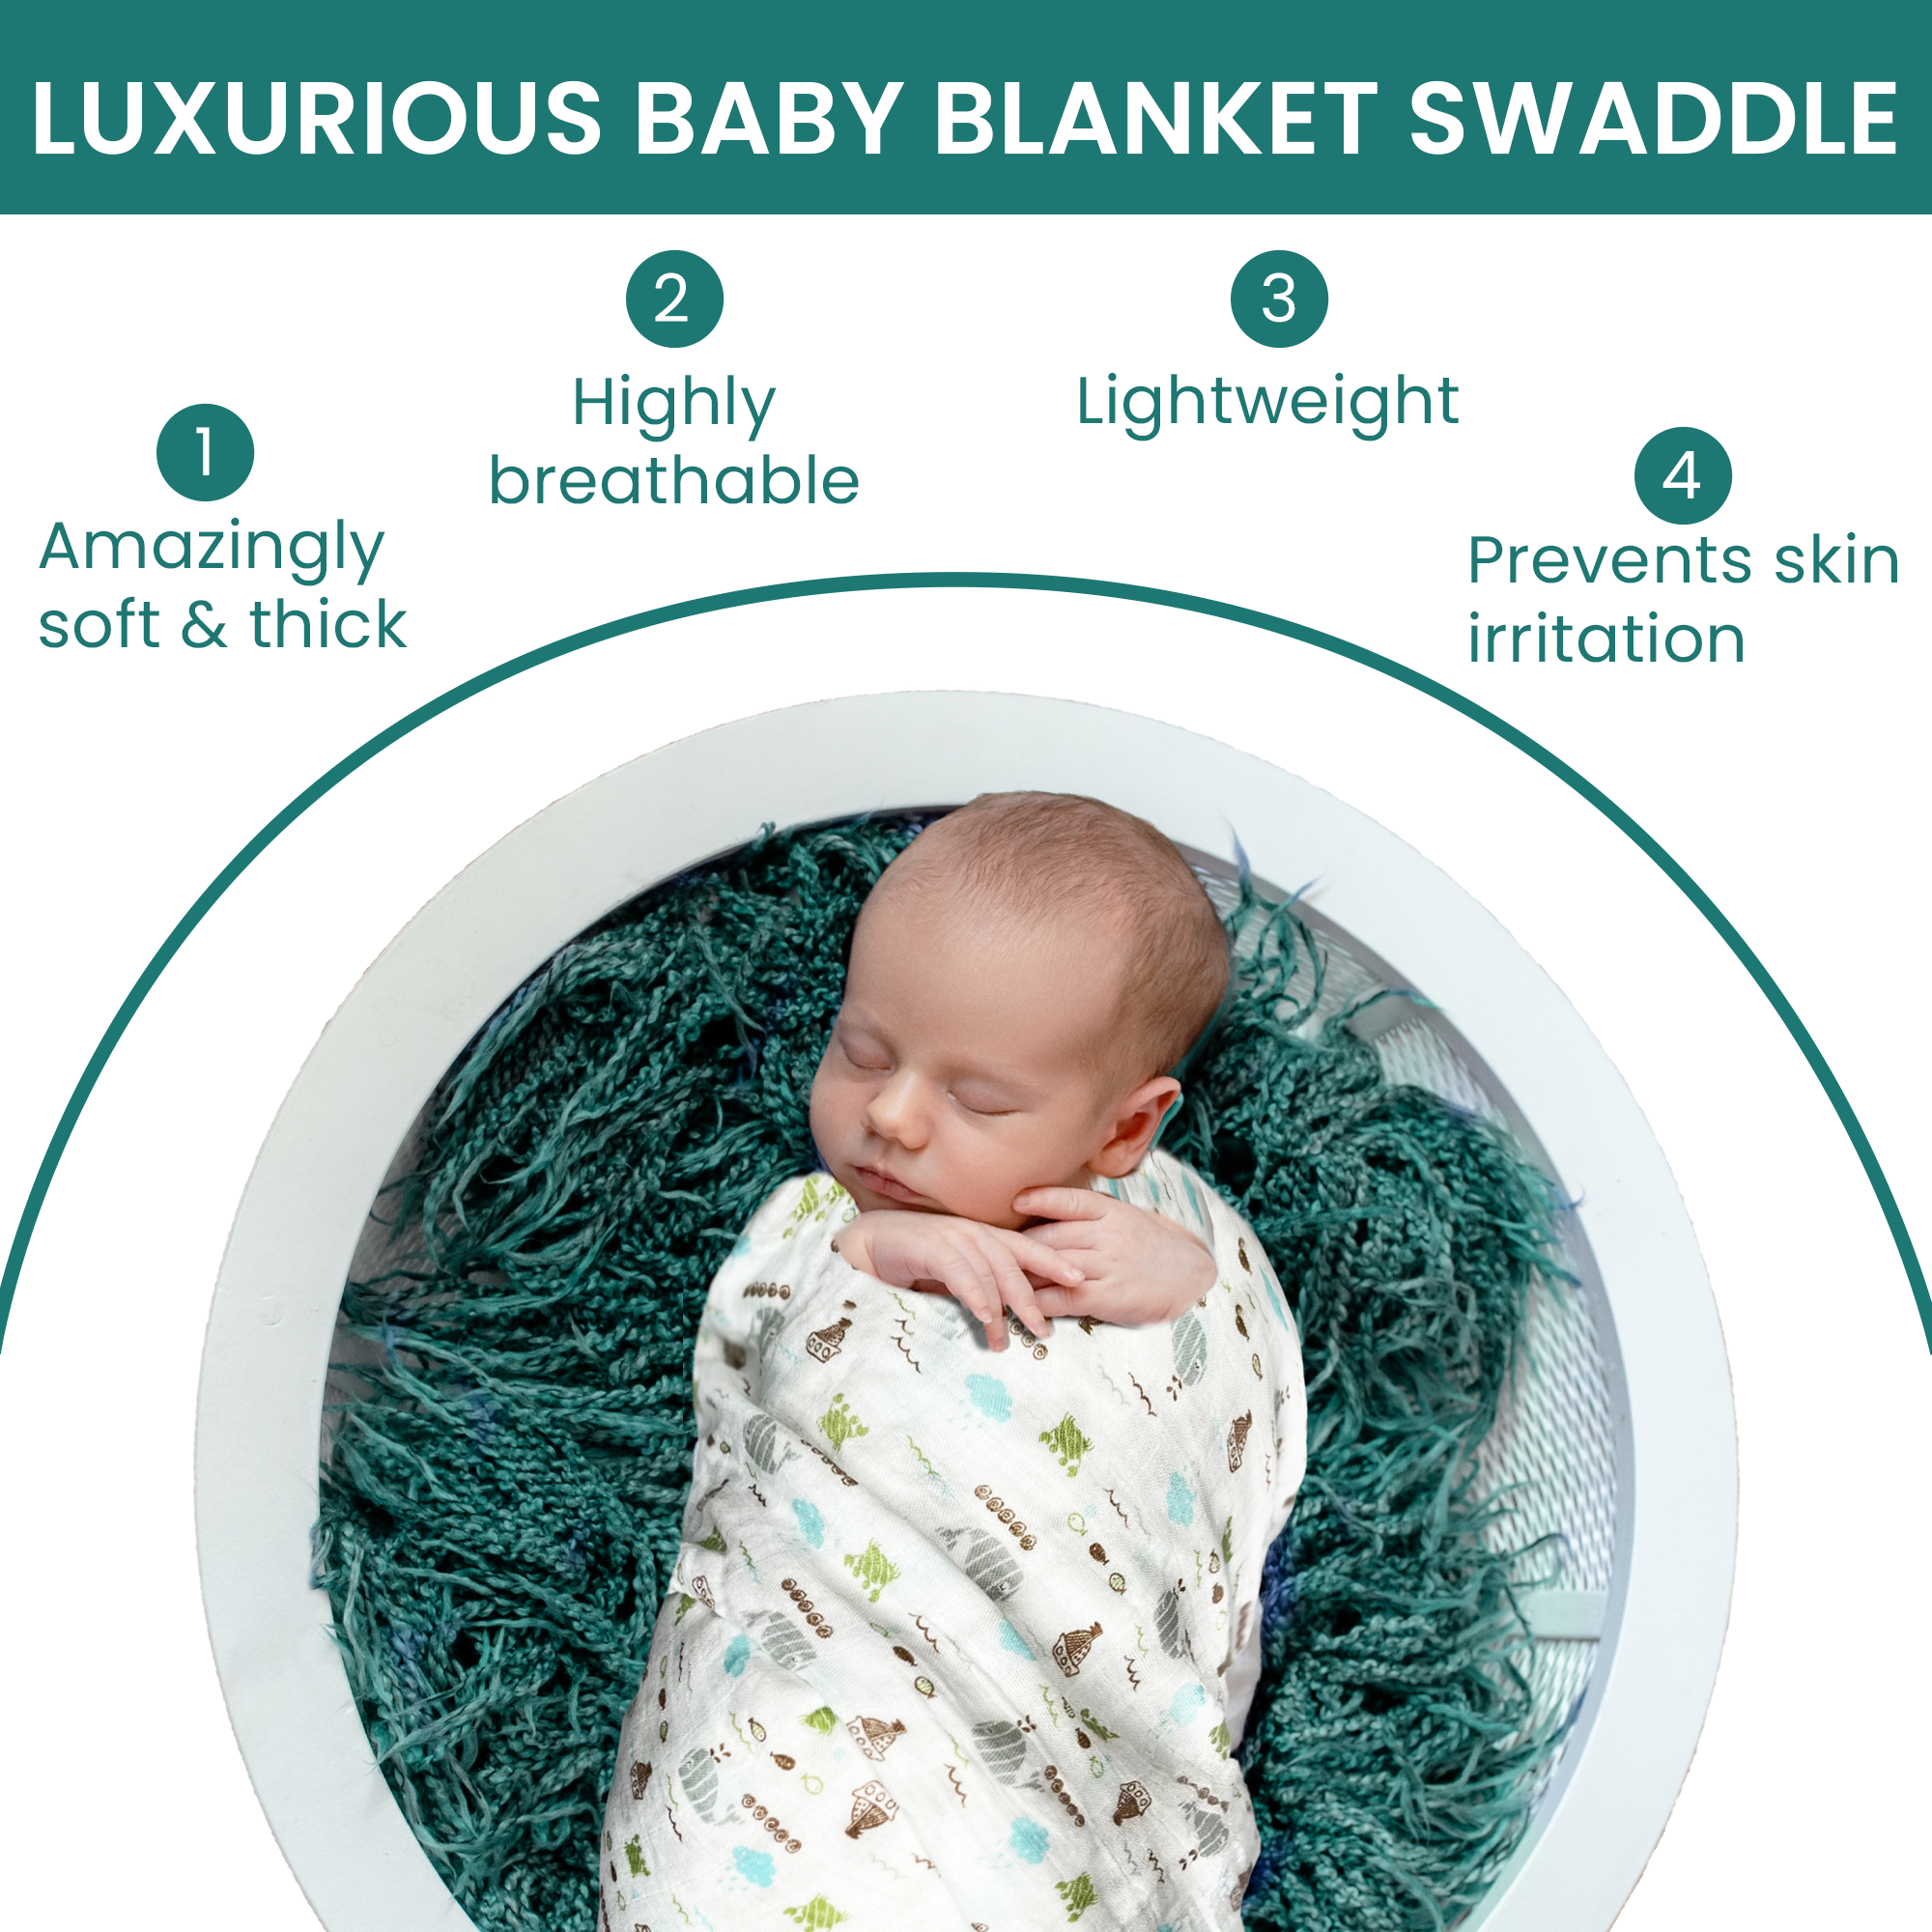 Swaddle baby in luxurious atluxe blanket and Home Co.